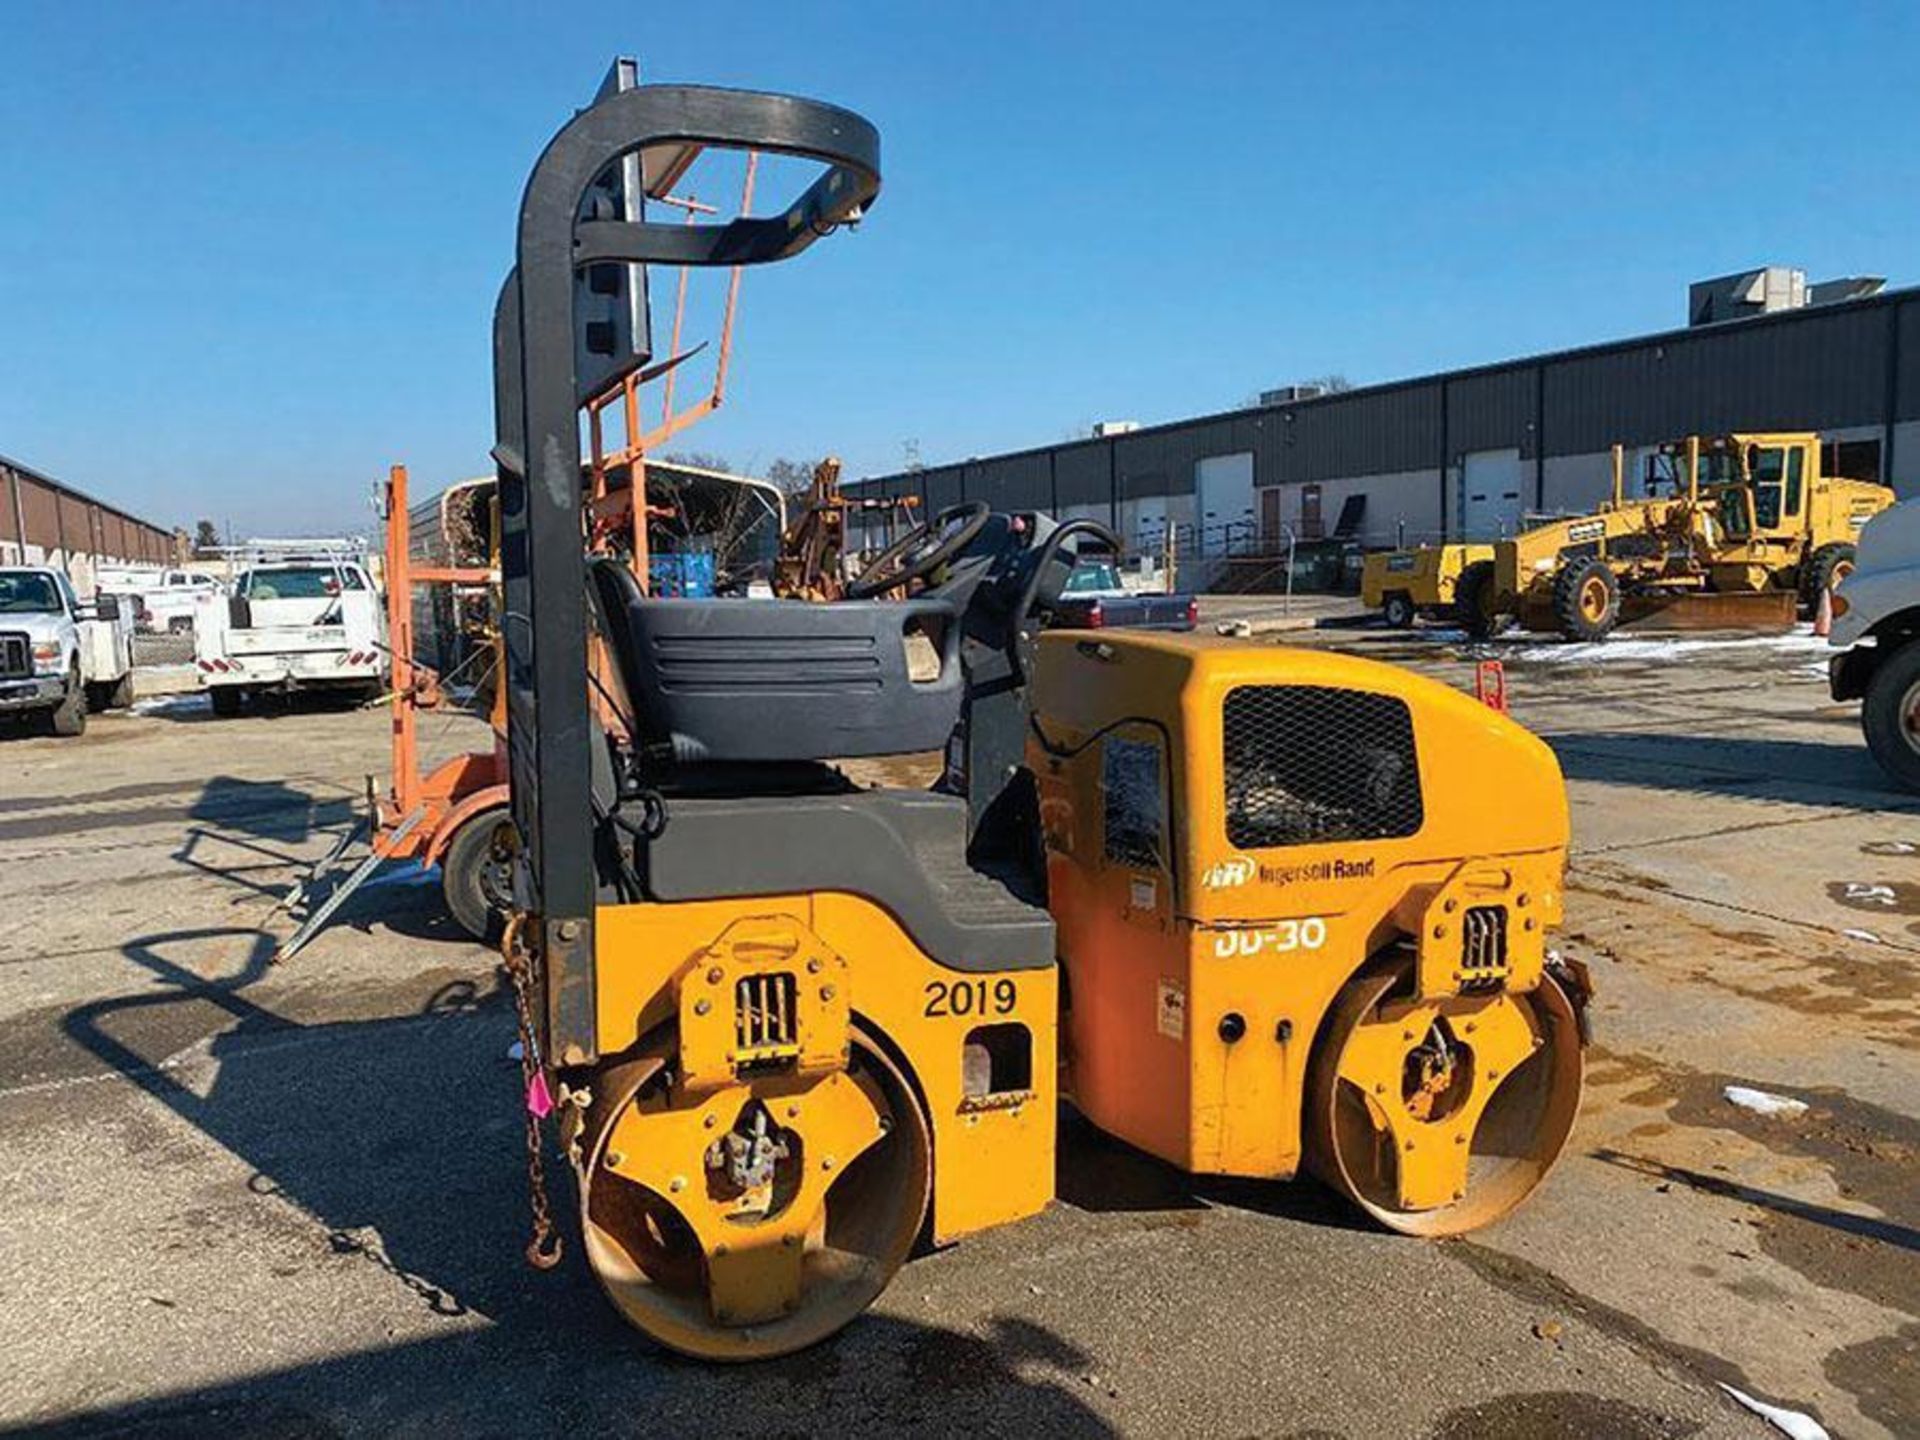 2000 INGERSOLL-RAND DD30 VIBRATING ROLLER, S/N 163216, 6,603 HOURS, OPEN ROPS, 54" WIDE DRUMS, 39.24 - Image 2 of 25